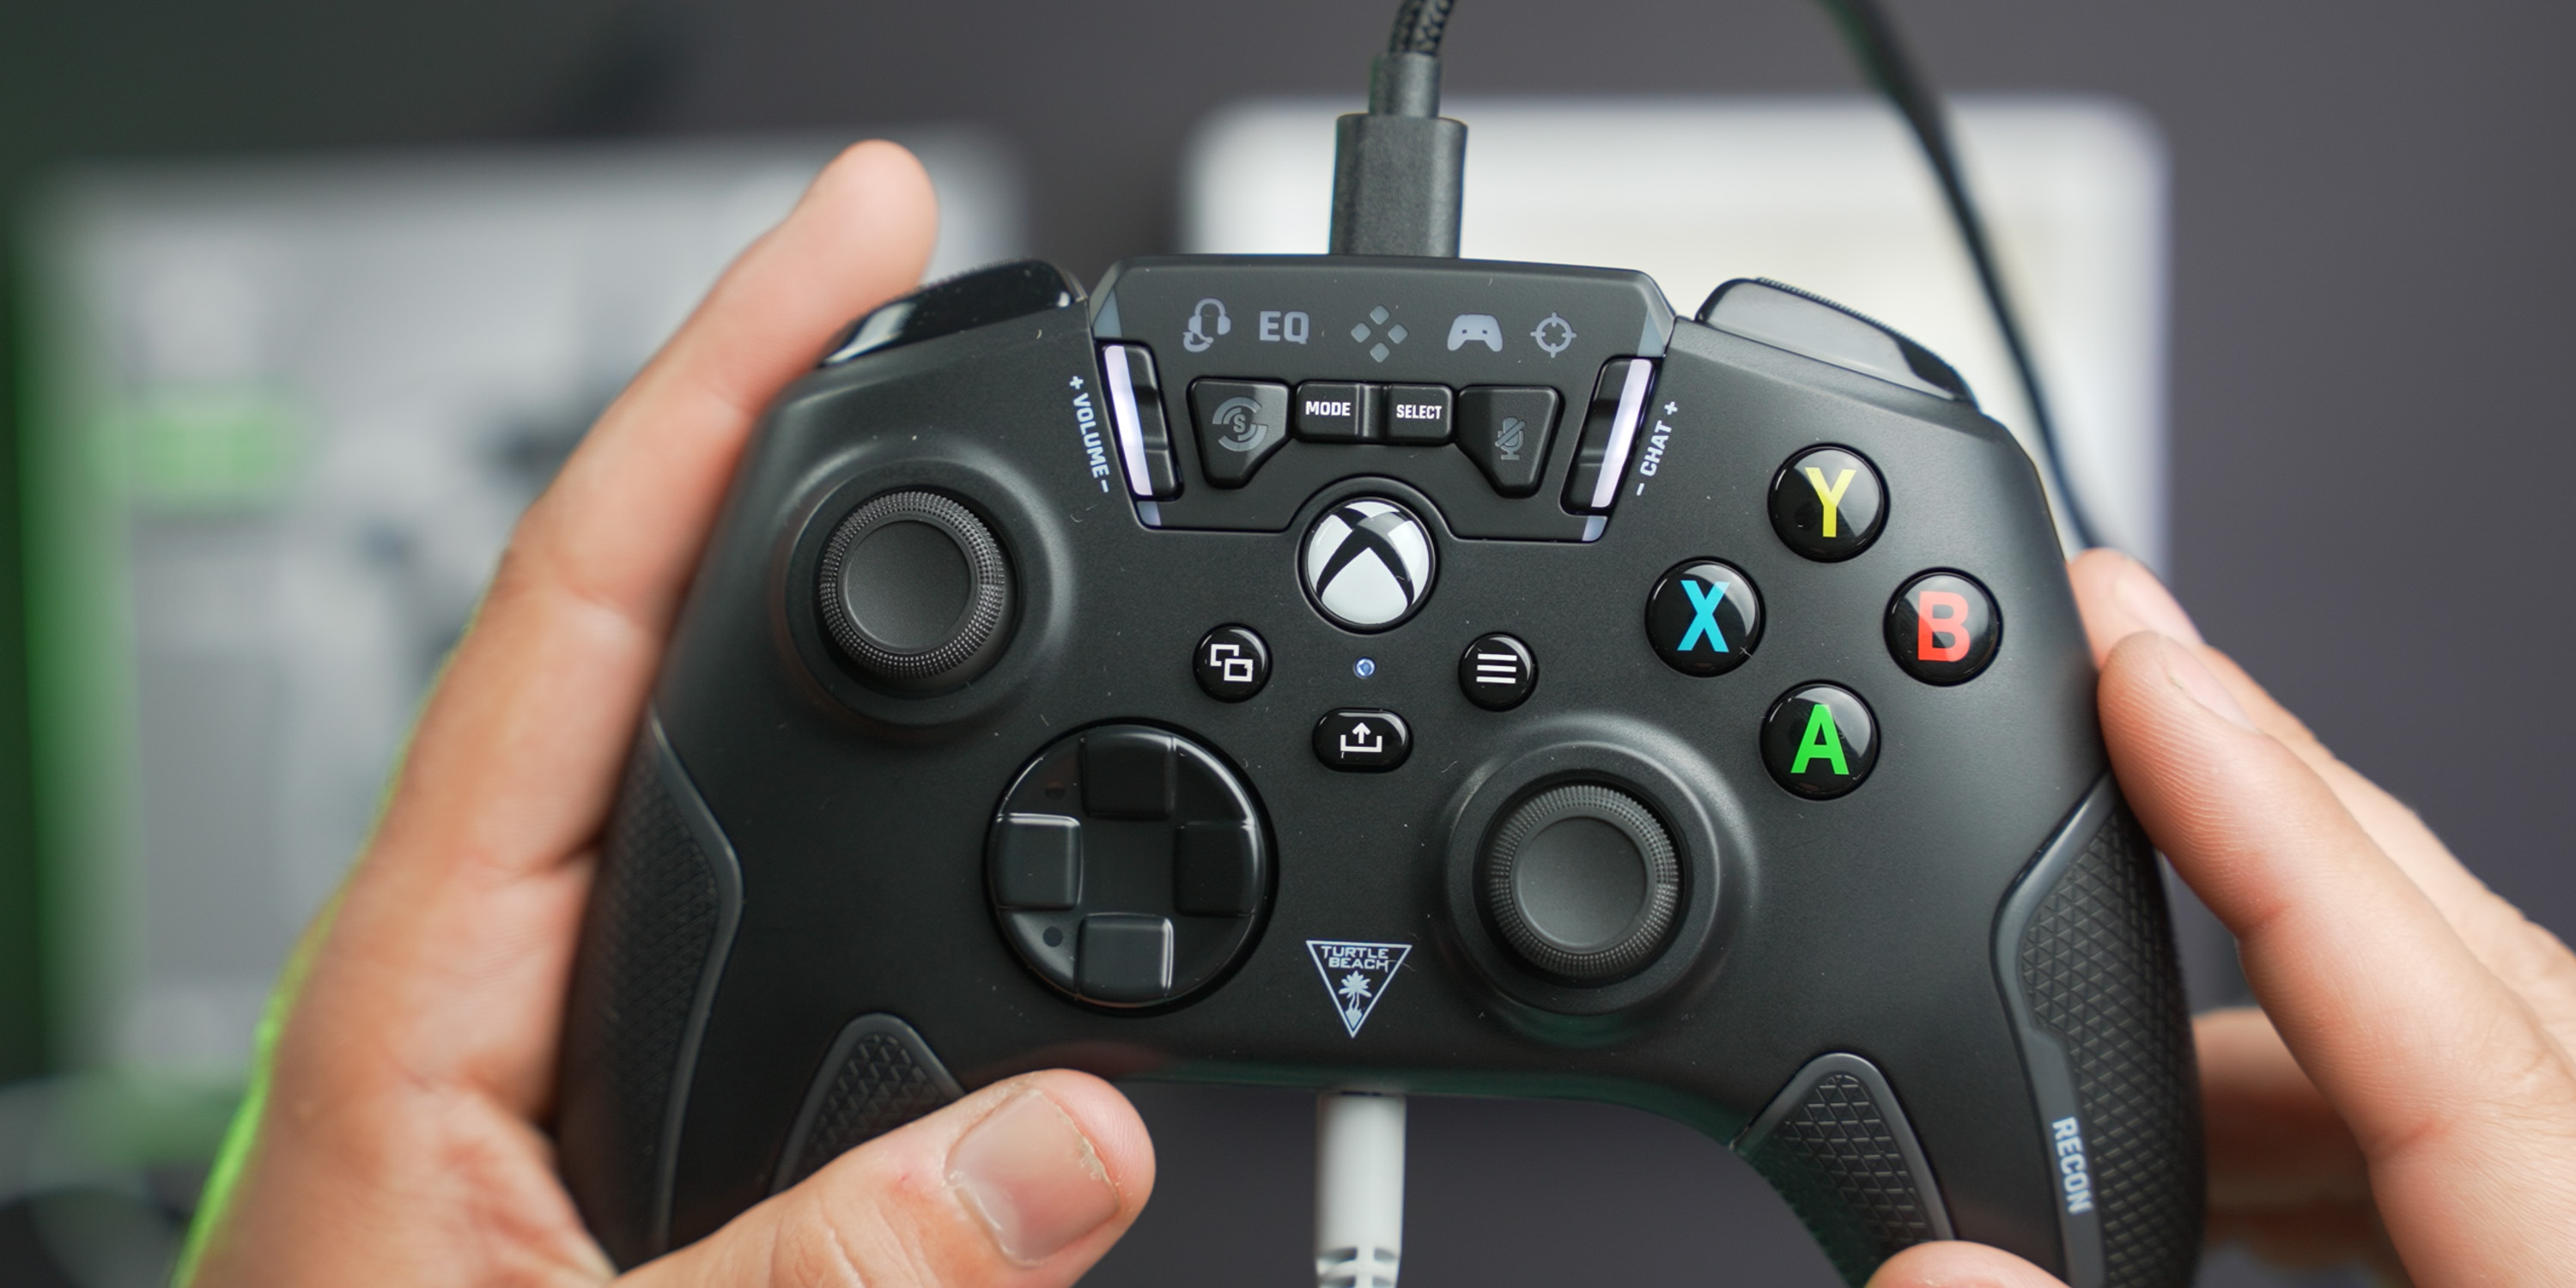 Turtle Beach Superhuman Xbox/PC gamepad delivers the pro 